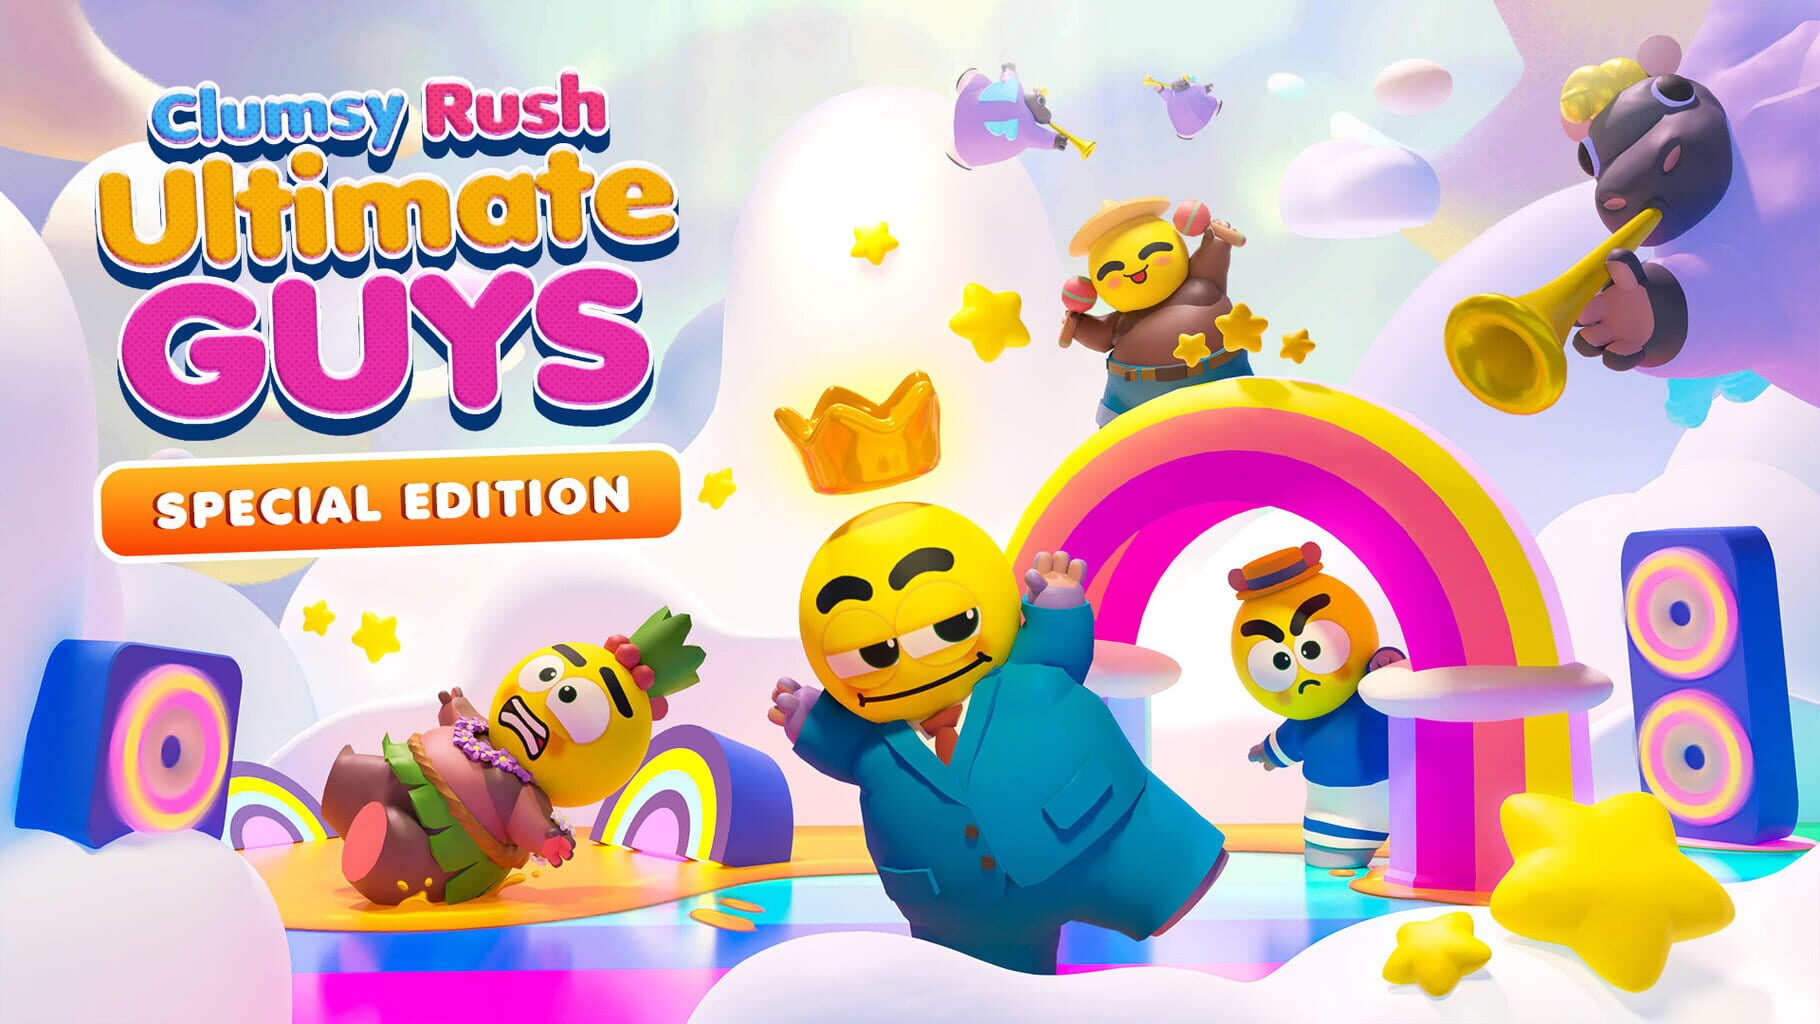 Clumsy Rush: Ultimate Guys - Special Edition artwork